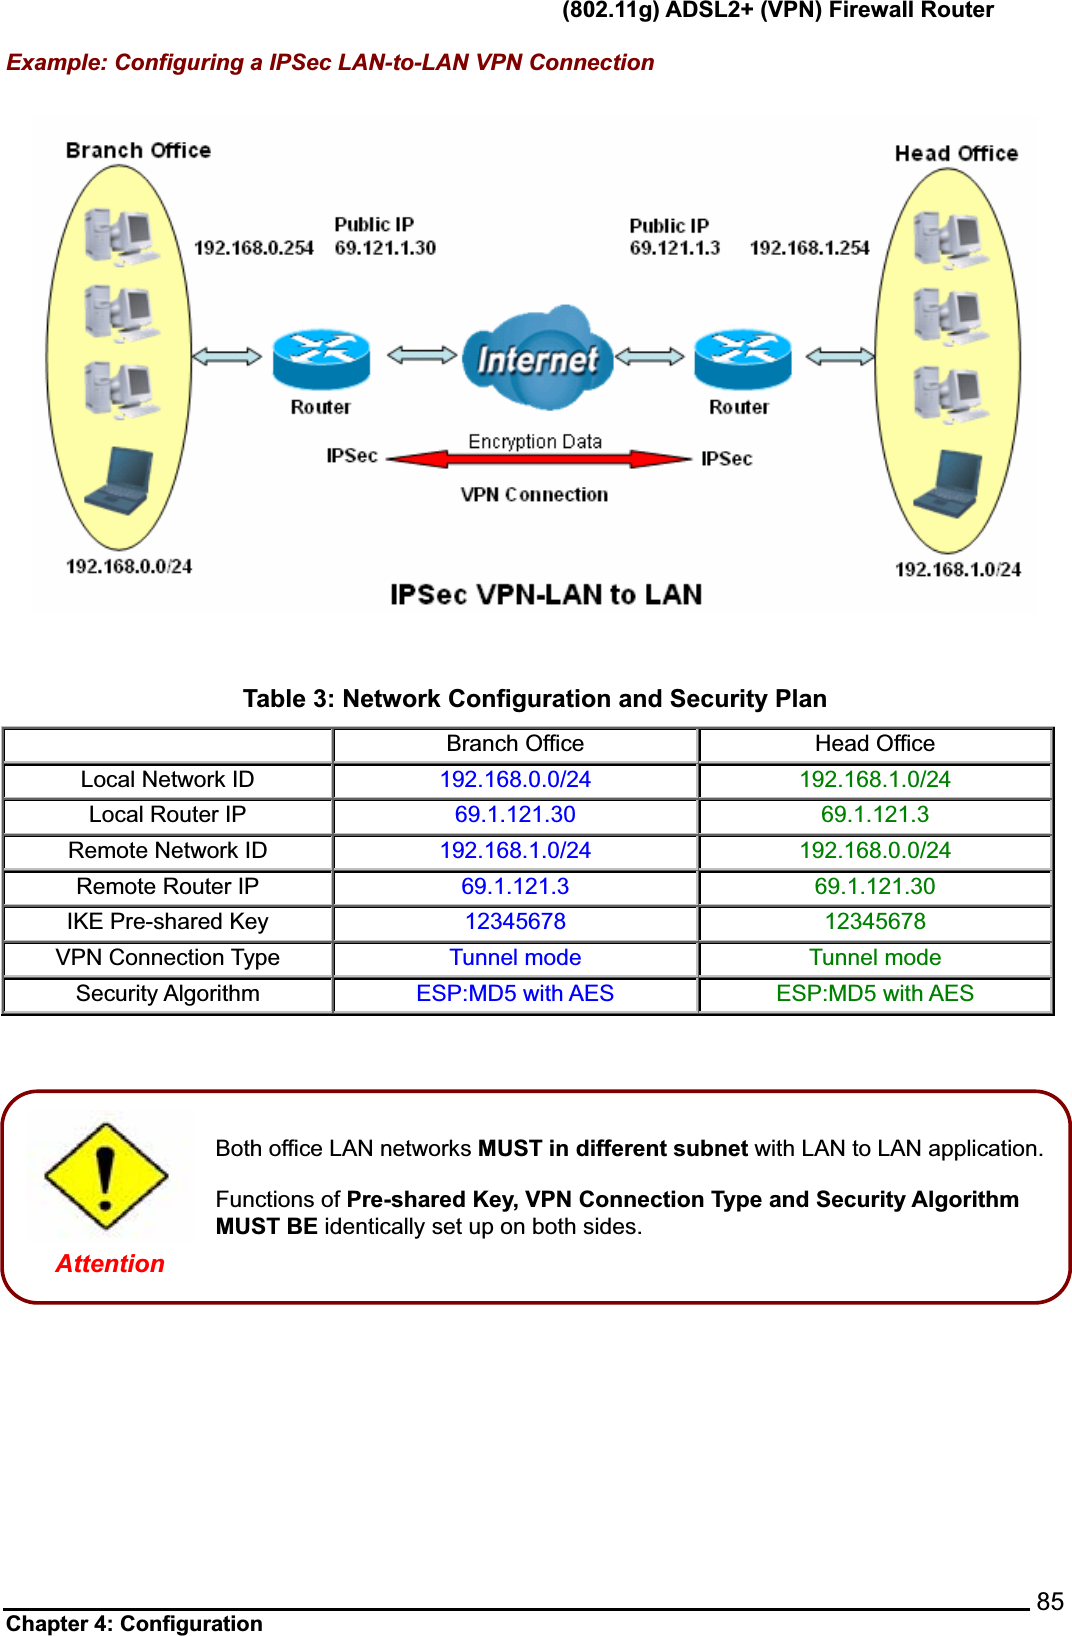      (802.11g) ADSL2+ (VPN) Firewall Router Chapter 4: Configuration    85Example: Configuring a IPSec LAN-to-LAN VPN Connection Table 3: Network Configuration and Security Plan Branch Office  Head Office Local Network ID  192.168.0.0/24  192.168.1.0/24 Local Router IP  69.1.121.30  69.1.121.3Remote Network ID  192.168.1.0/24  192.168.0.0/24 Remote Router IP  69.1.121.3 69.1.121.30 IKE Pre-shared Key  12345678 12345678VPN Connection Type  Tunnel mode  Tunnel mode Security Algorithm  ESP:MD5 with AES  ESP:MD5 with AES Both office LAN networks MUST in different subnet with LAN to LAN application.Functions of Pre-shared Key, VPN Connection Type and Security Algorithm MUST BE identically set up on both sides. Attention